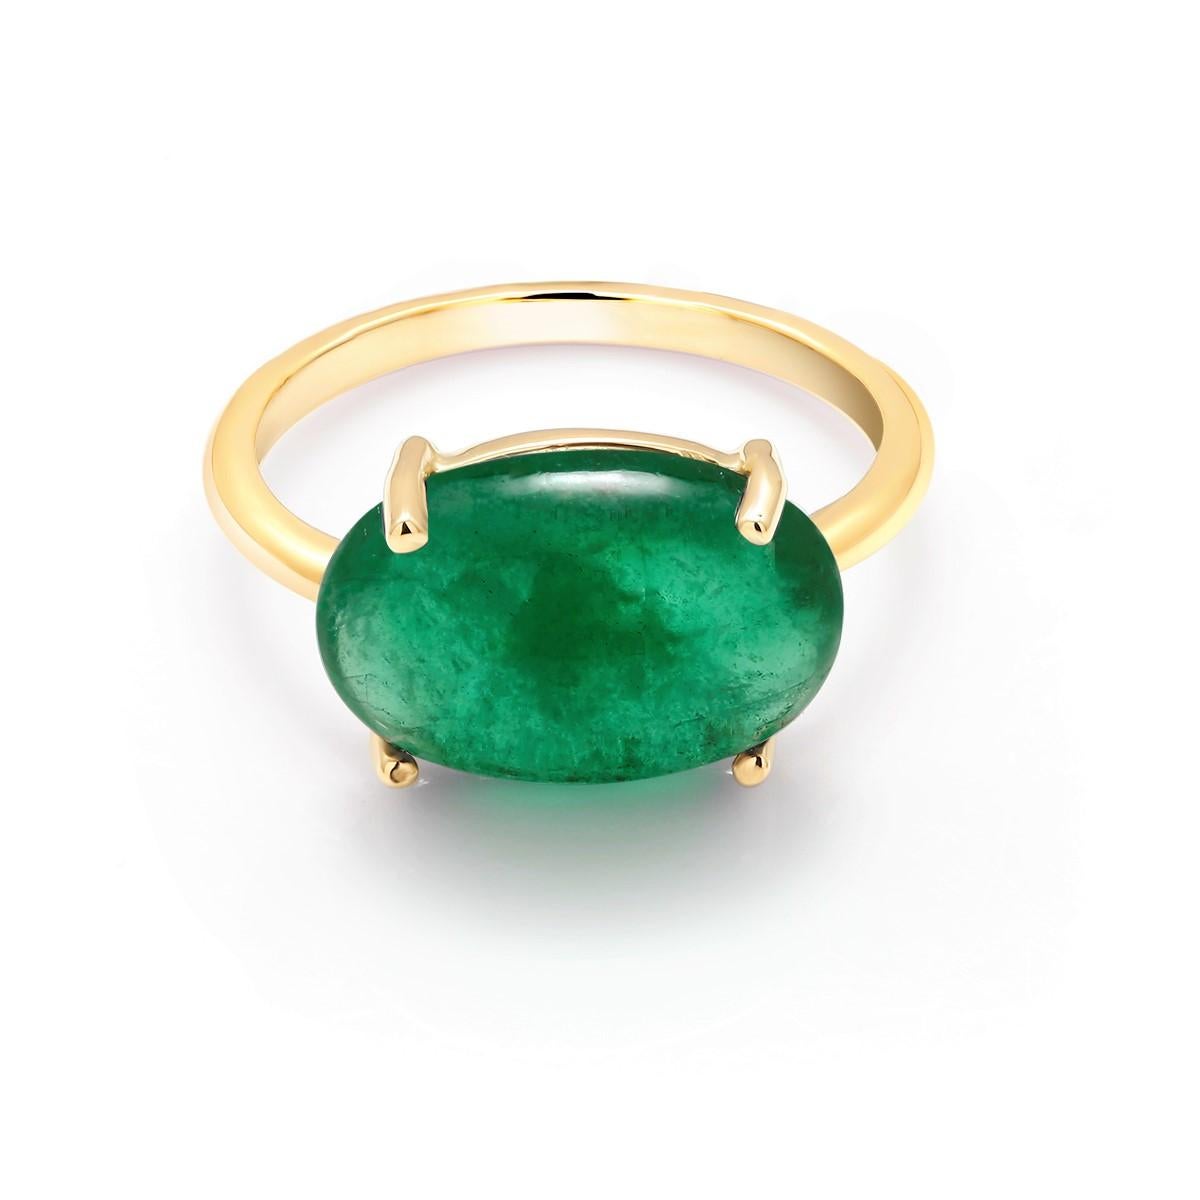 Contemporary Cabochon Emerald Solitaire Yellow Gold Cocktail Ring Weighing 6.70 Carats